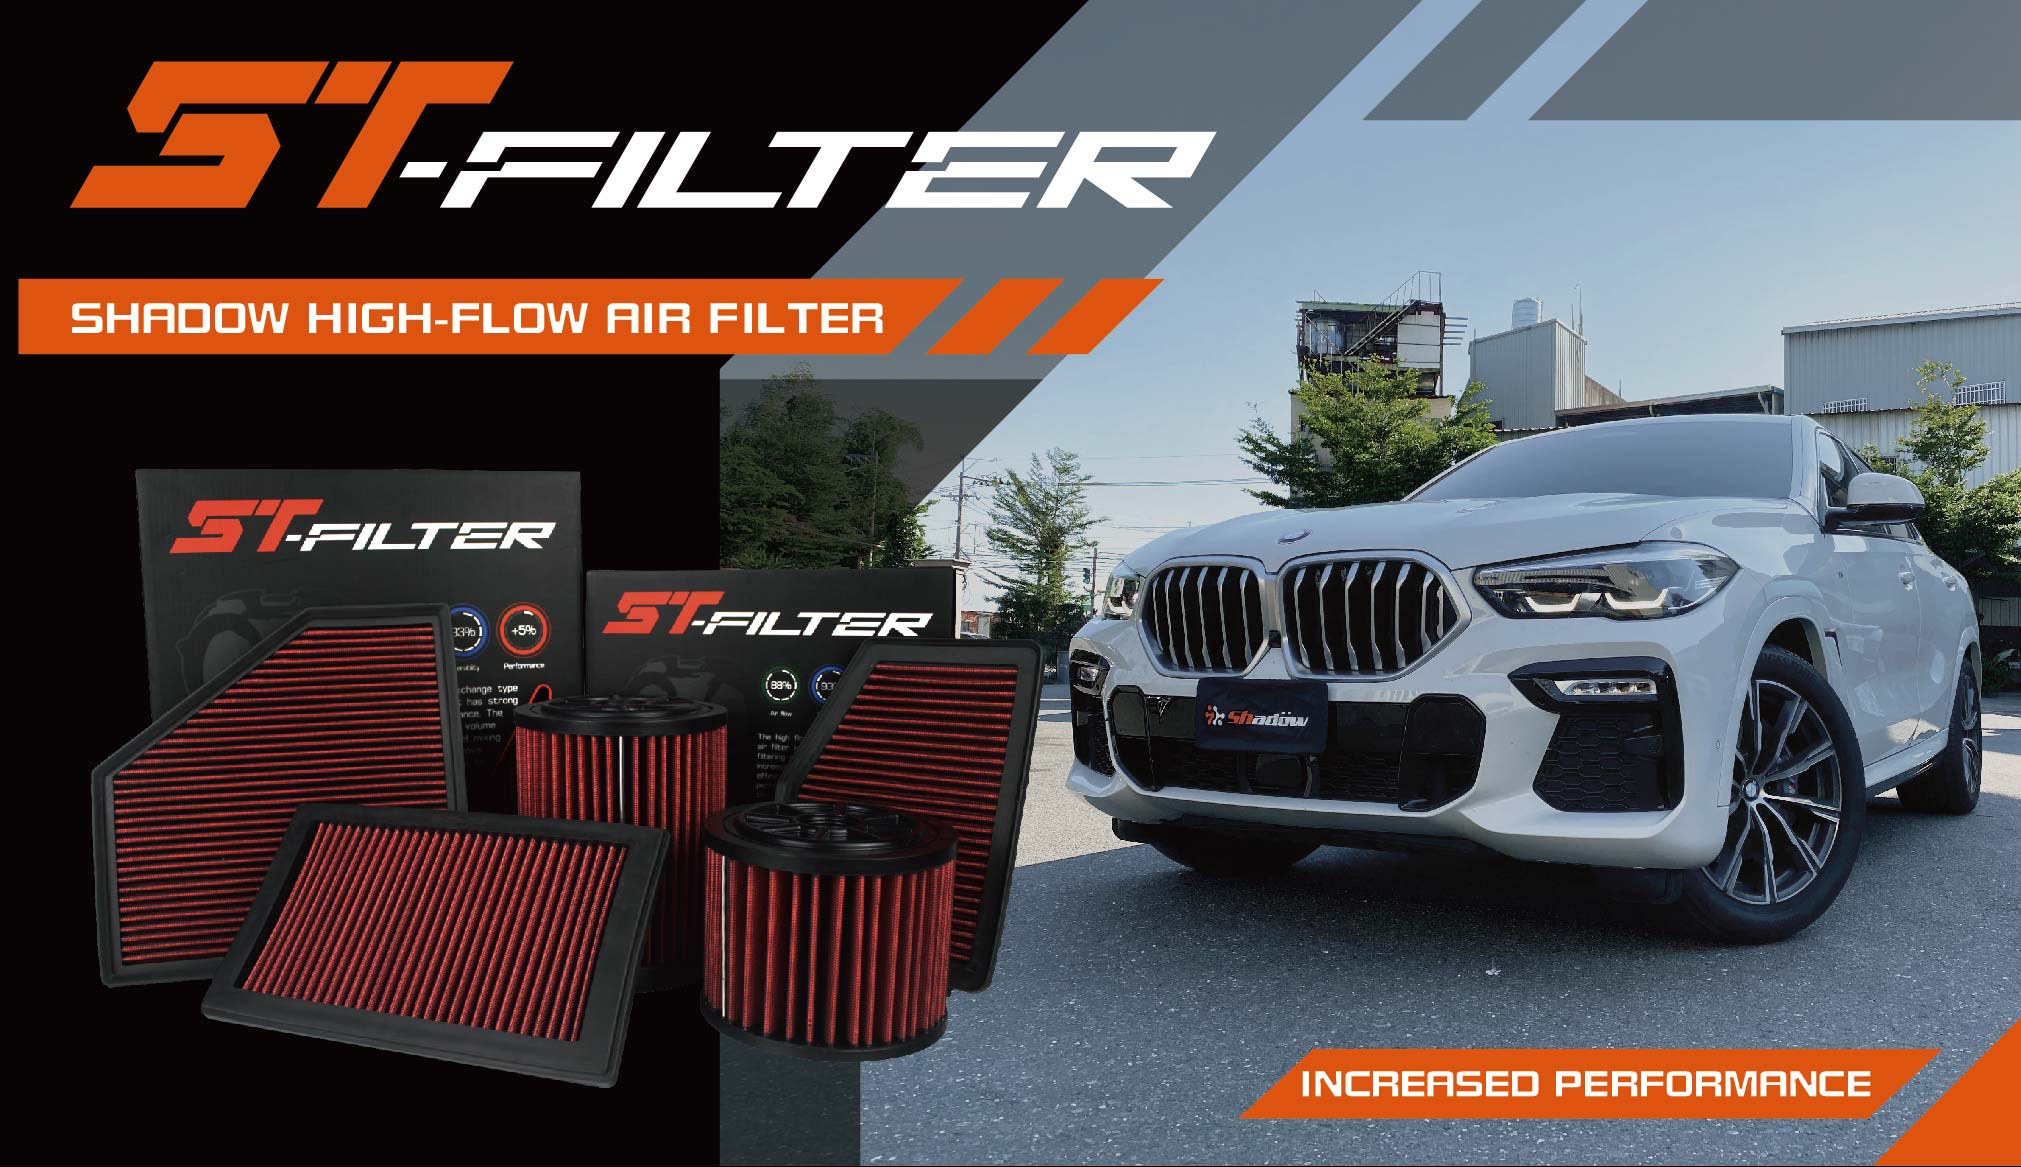 ST-Filter high flow air filter offers greater airflow, faster flow rates, and more stable air flow.